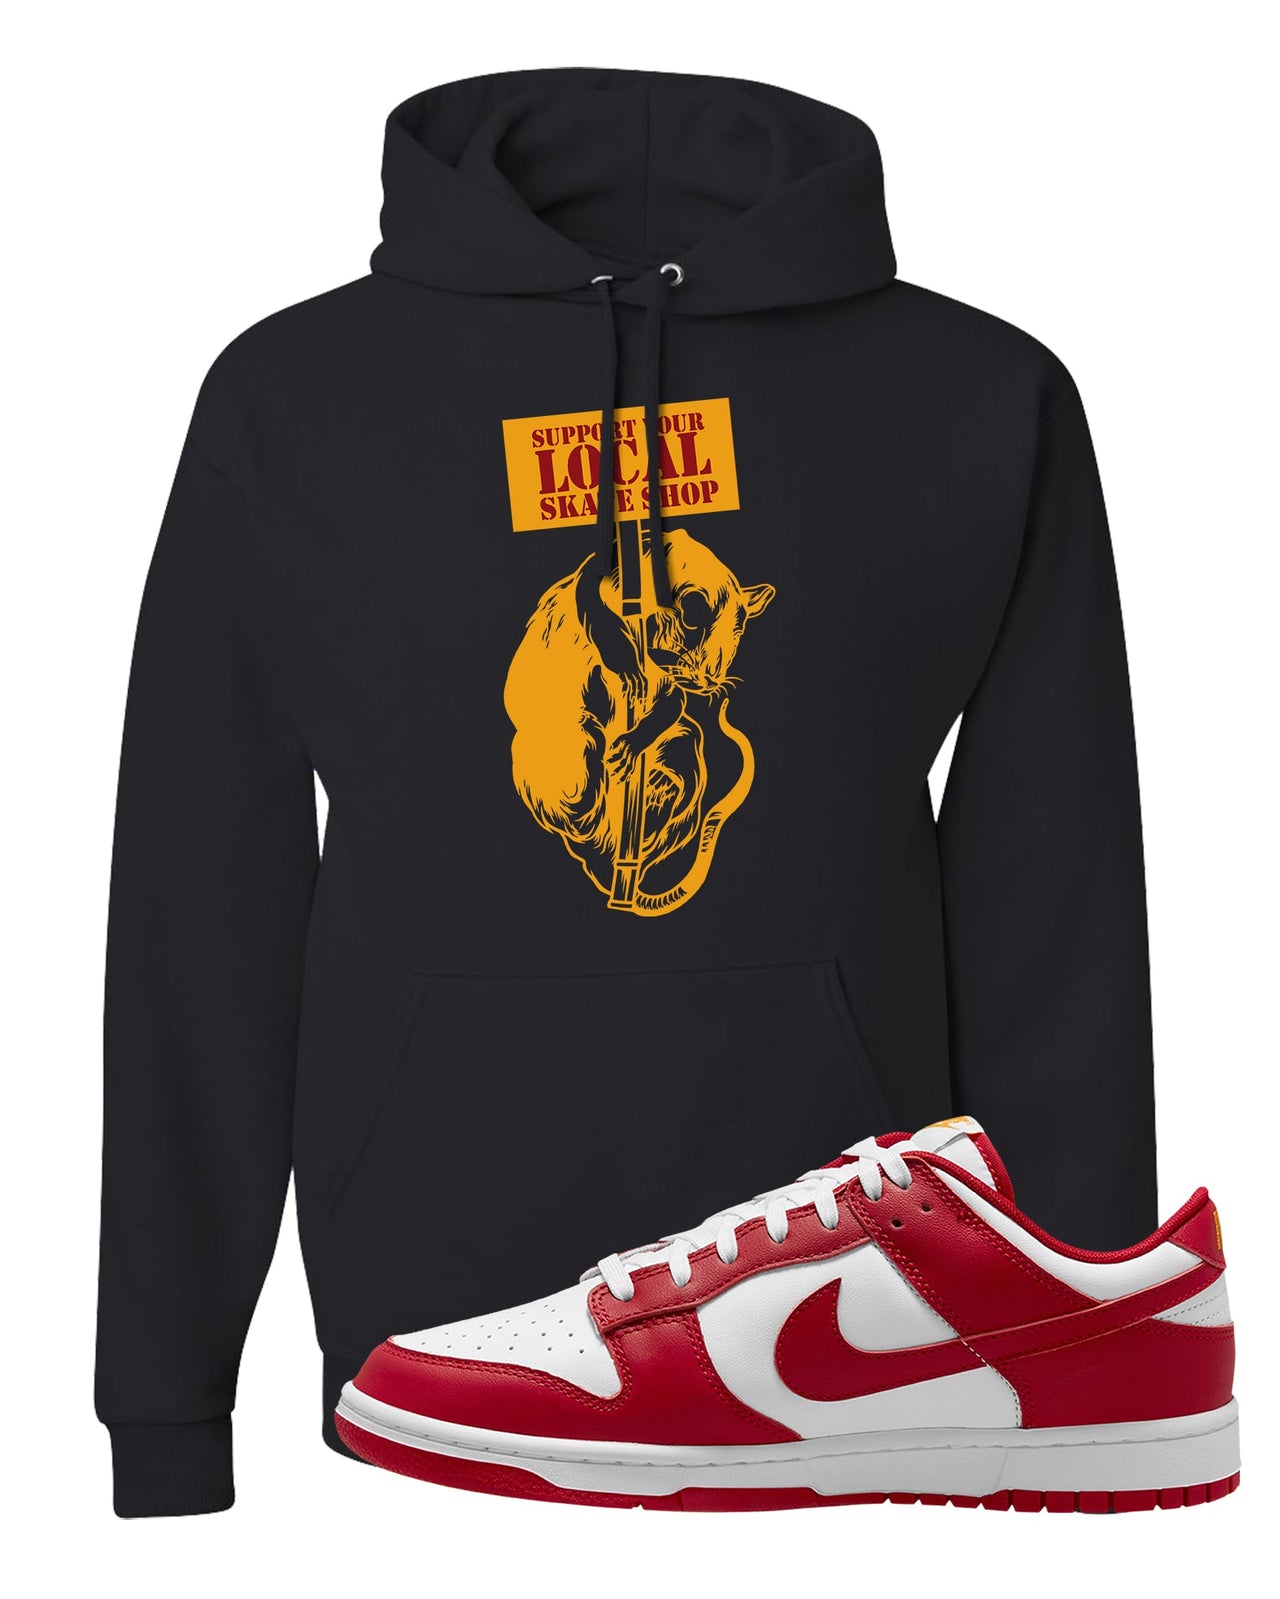 Red White Yellow Low Dunks Hoodie | Support Your Local Skate Shop, Black